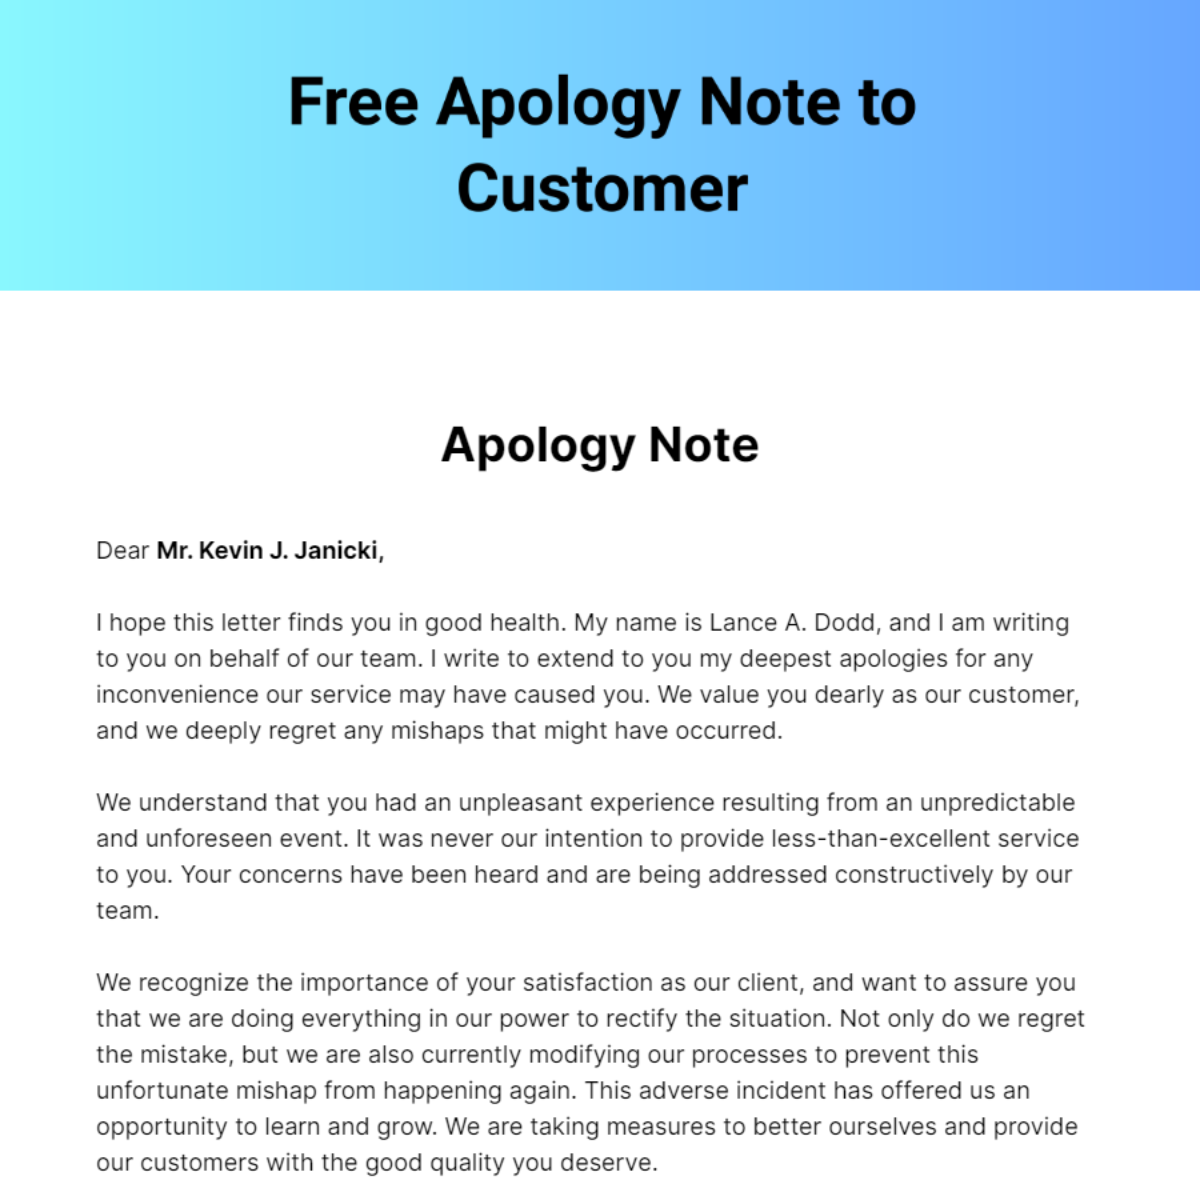 Apology Note to Customer Template